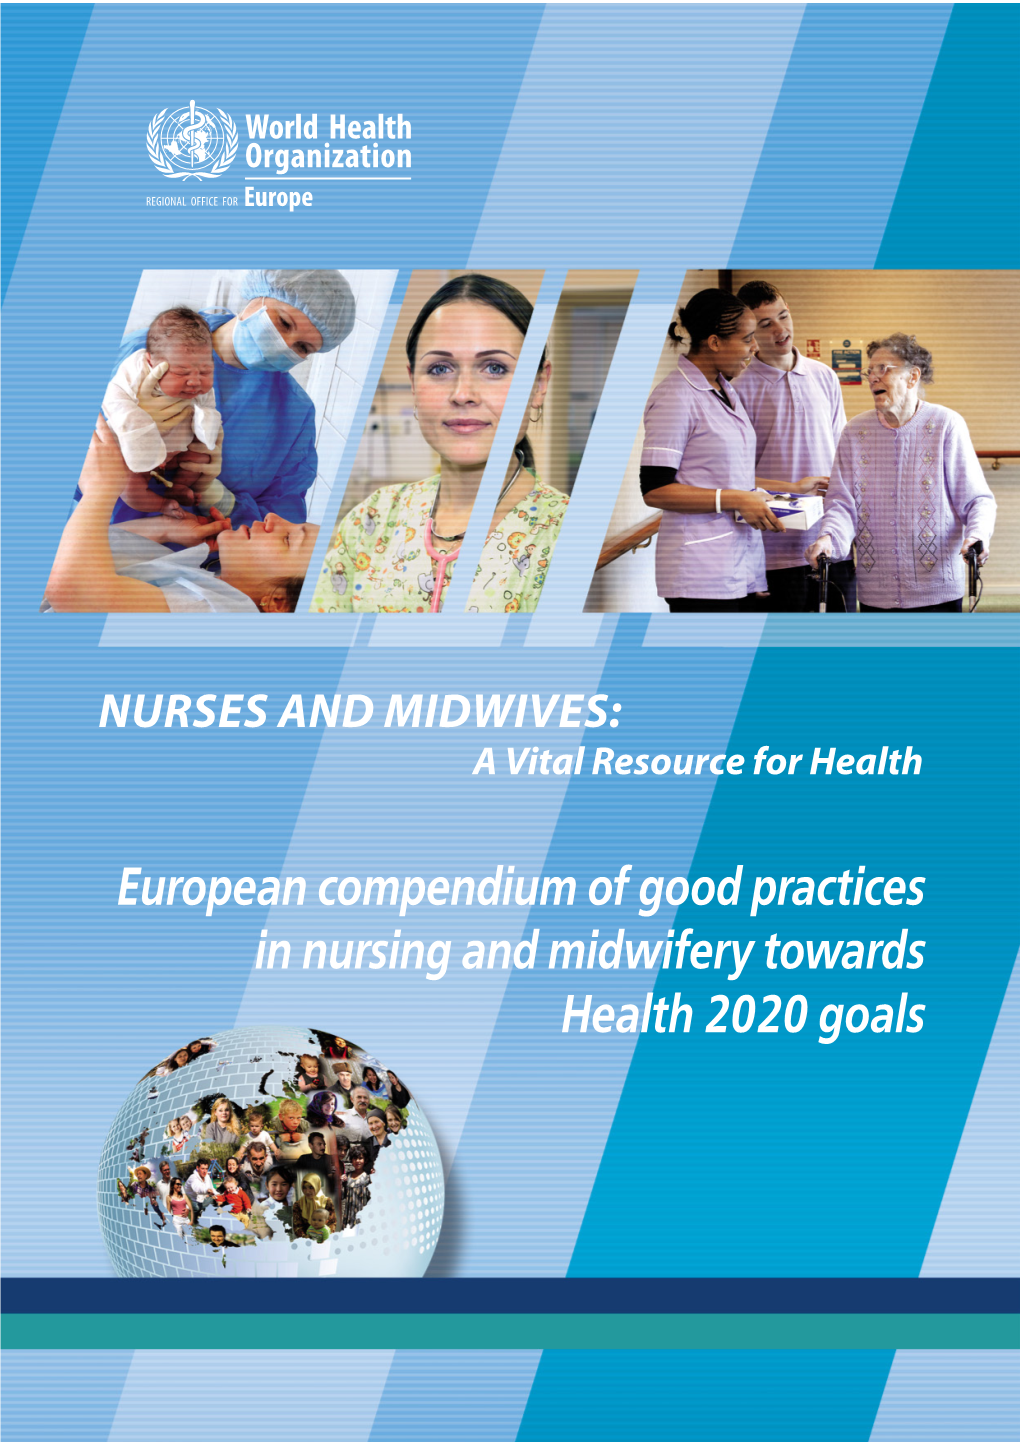 NURSES and MIDWIVES: a Vital Resource for Health